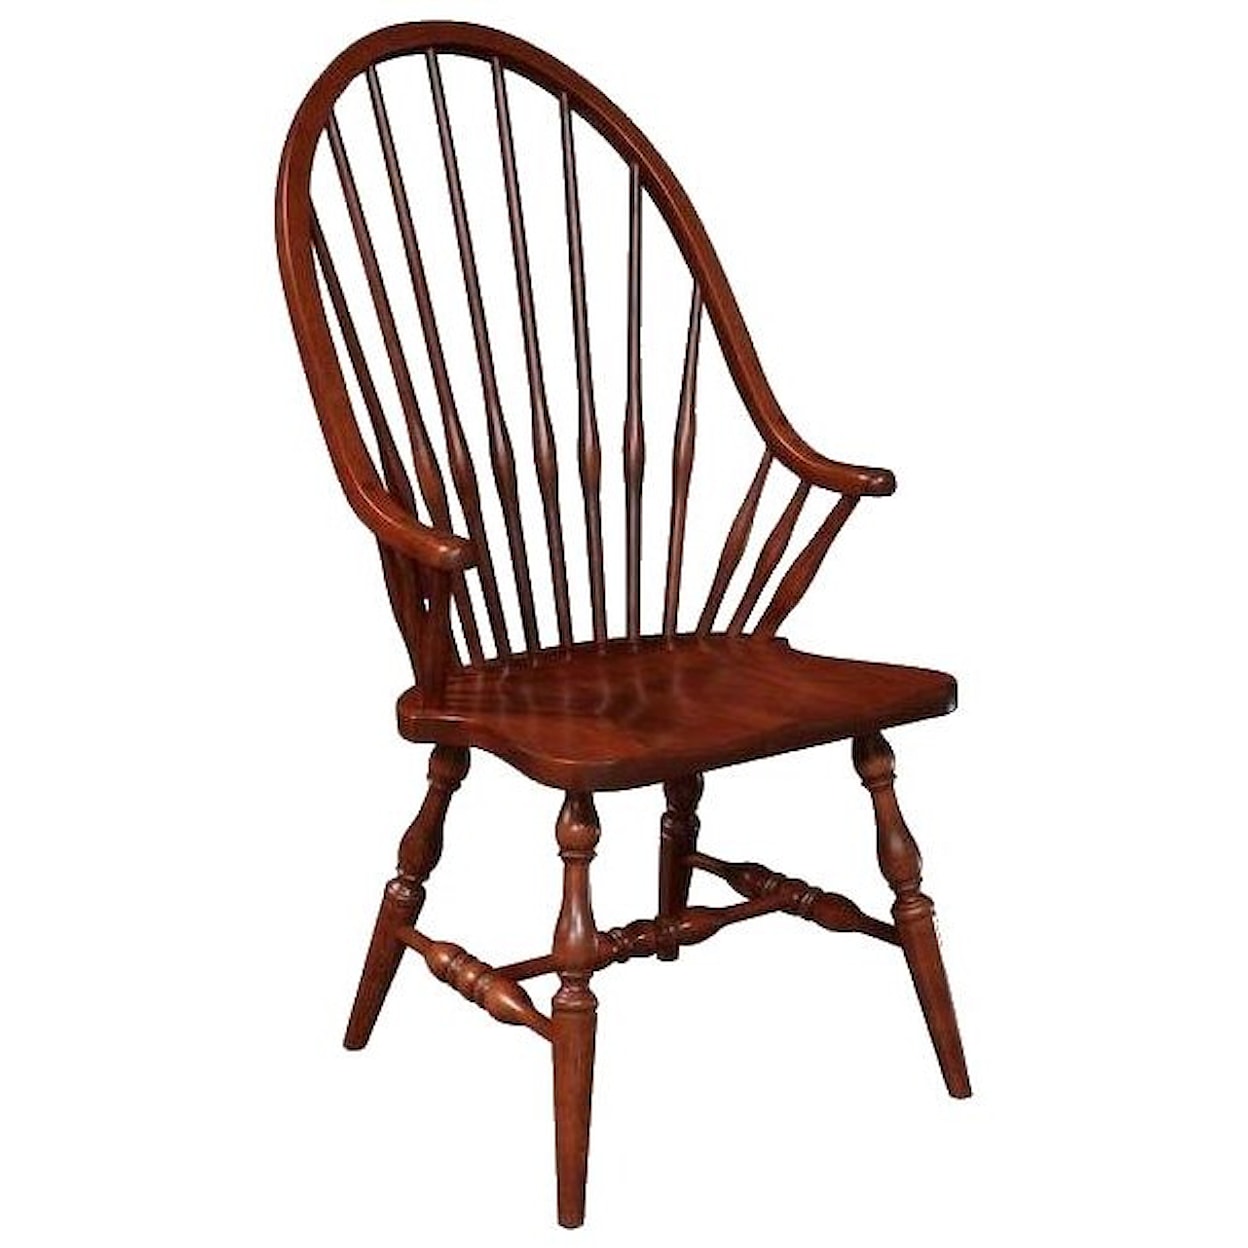 Wengerd Wood Products Delaware Arm Chair